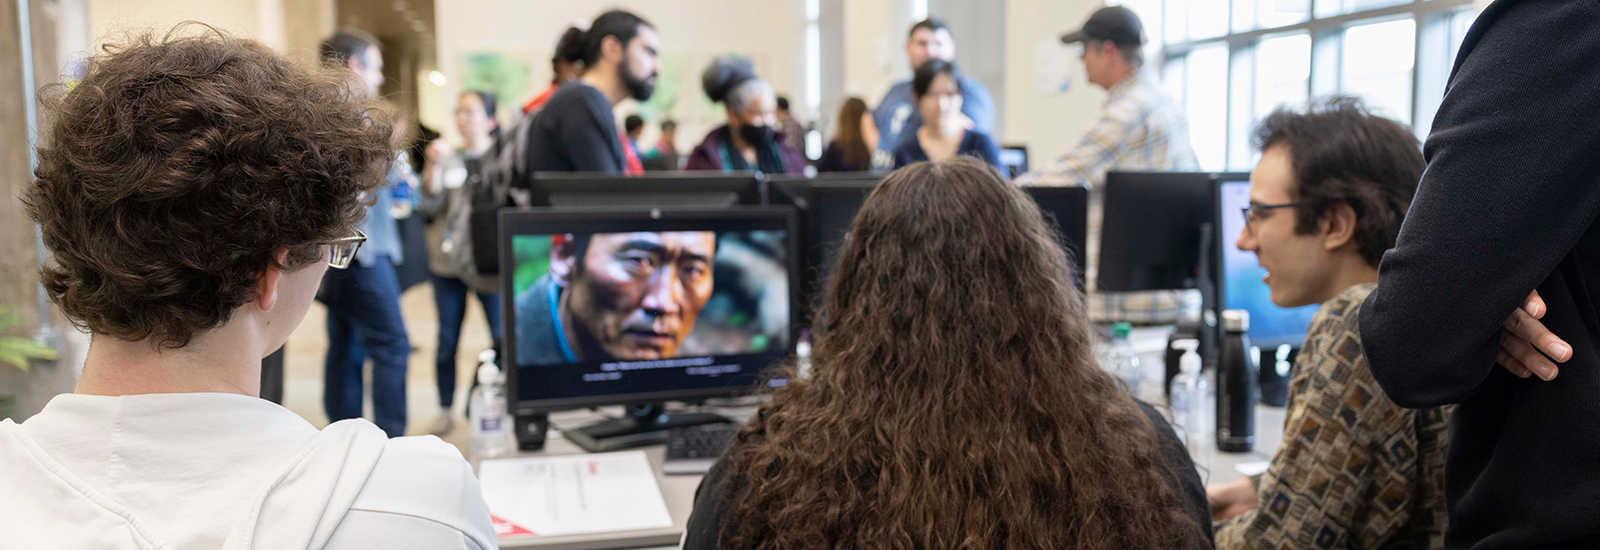 A group of three students sit at a table, watching a student-made video on a desktop computer. In the background, people socialize in the ACCAD computer lab during the Open House.